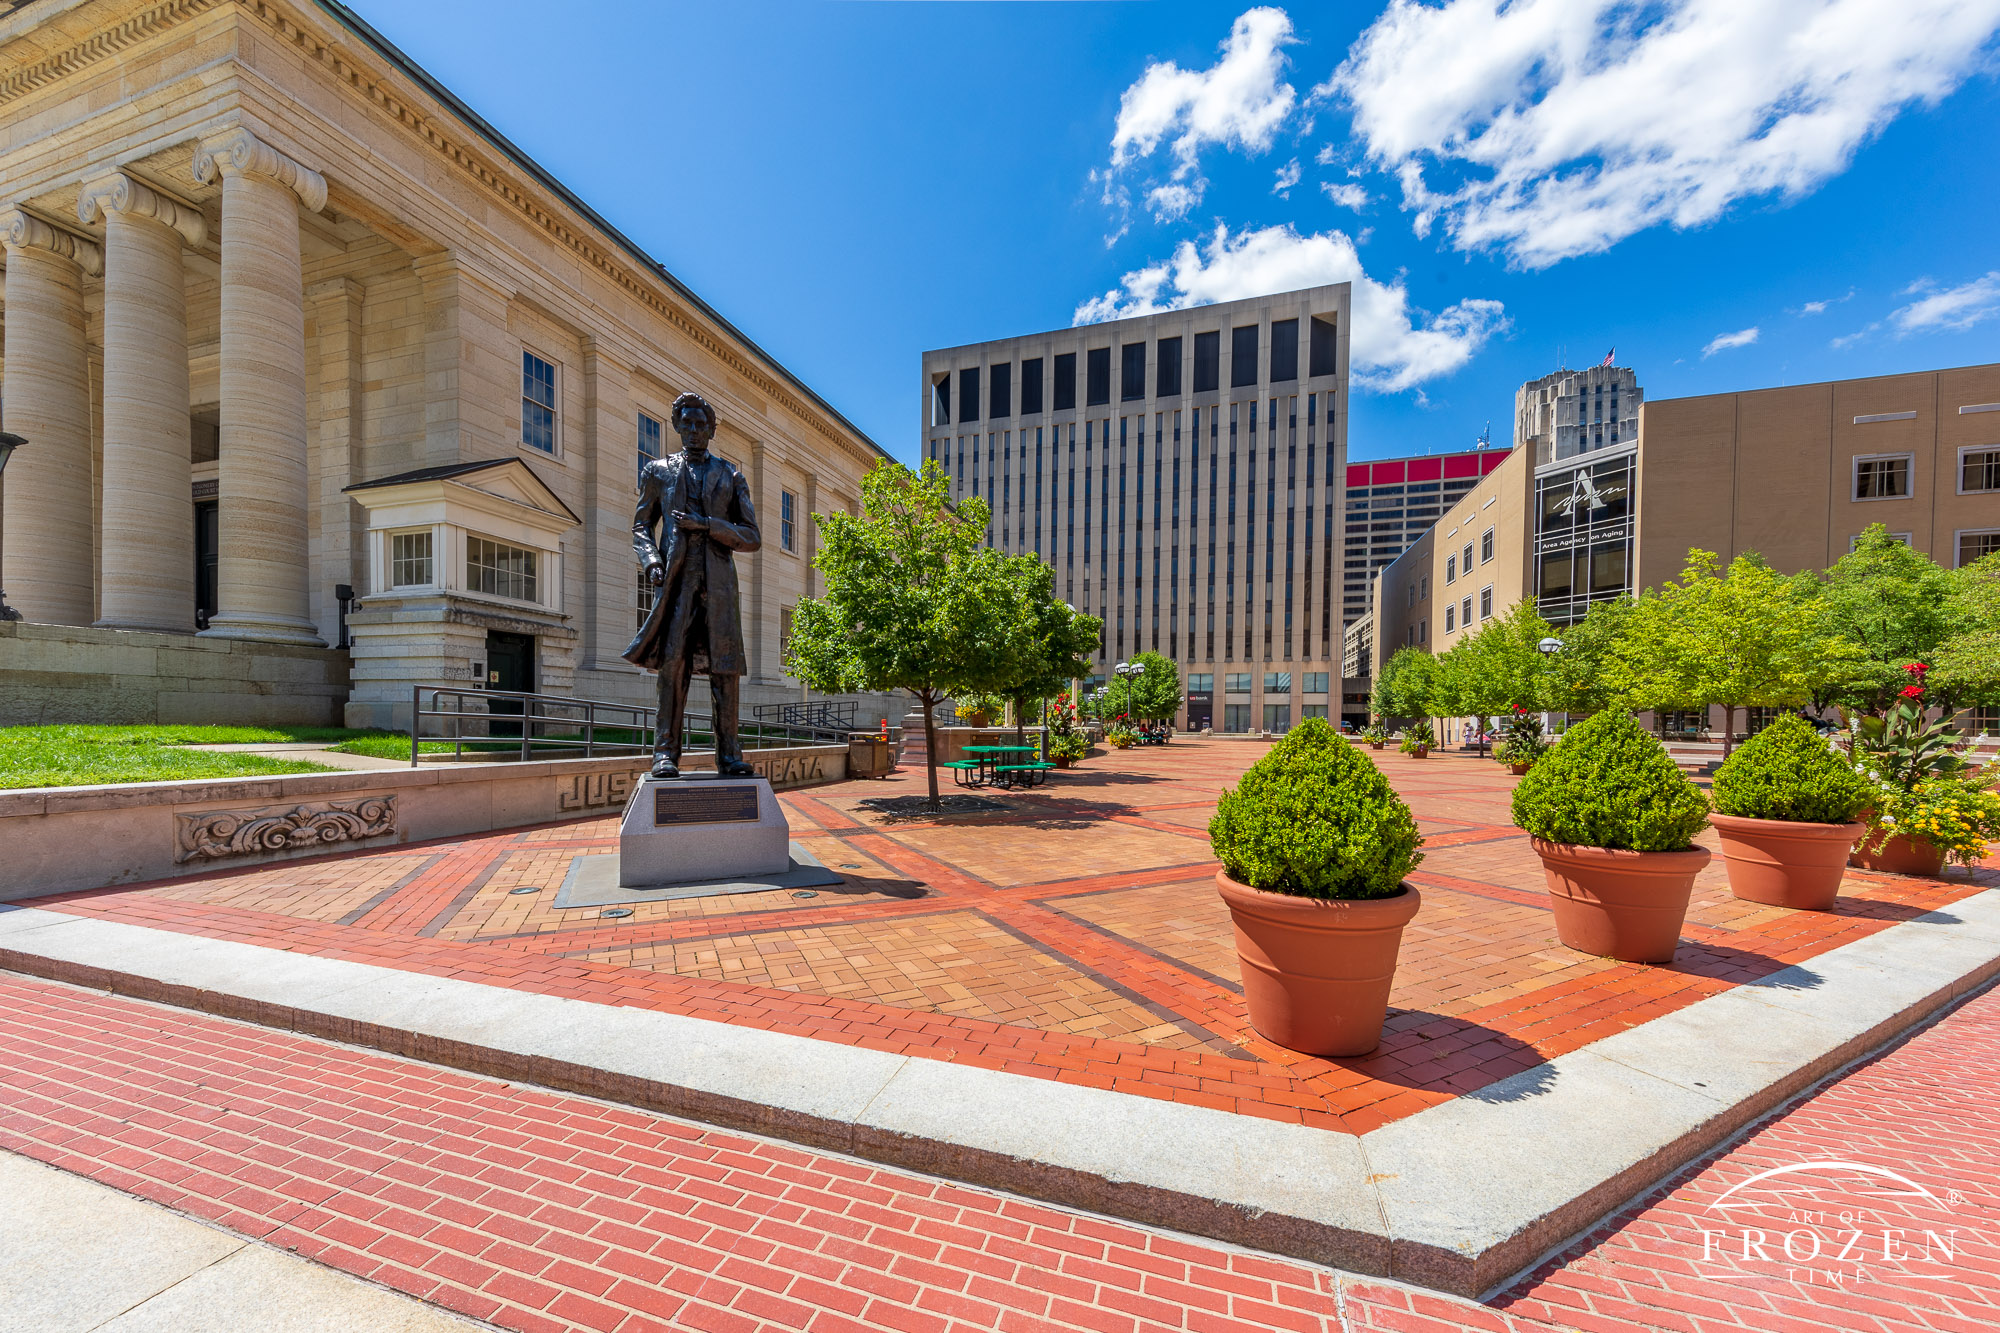 An 11-foot tall statue of Abraham Lincoln standing in the Old Montgomery County Courthouse Square